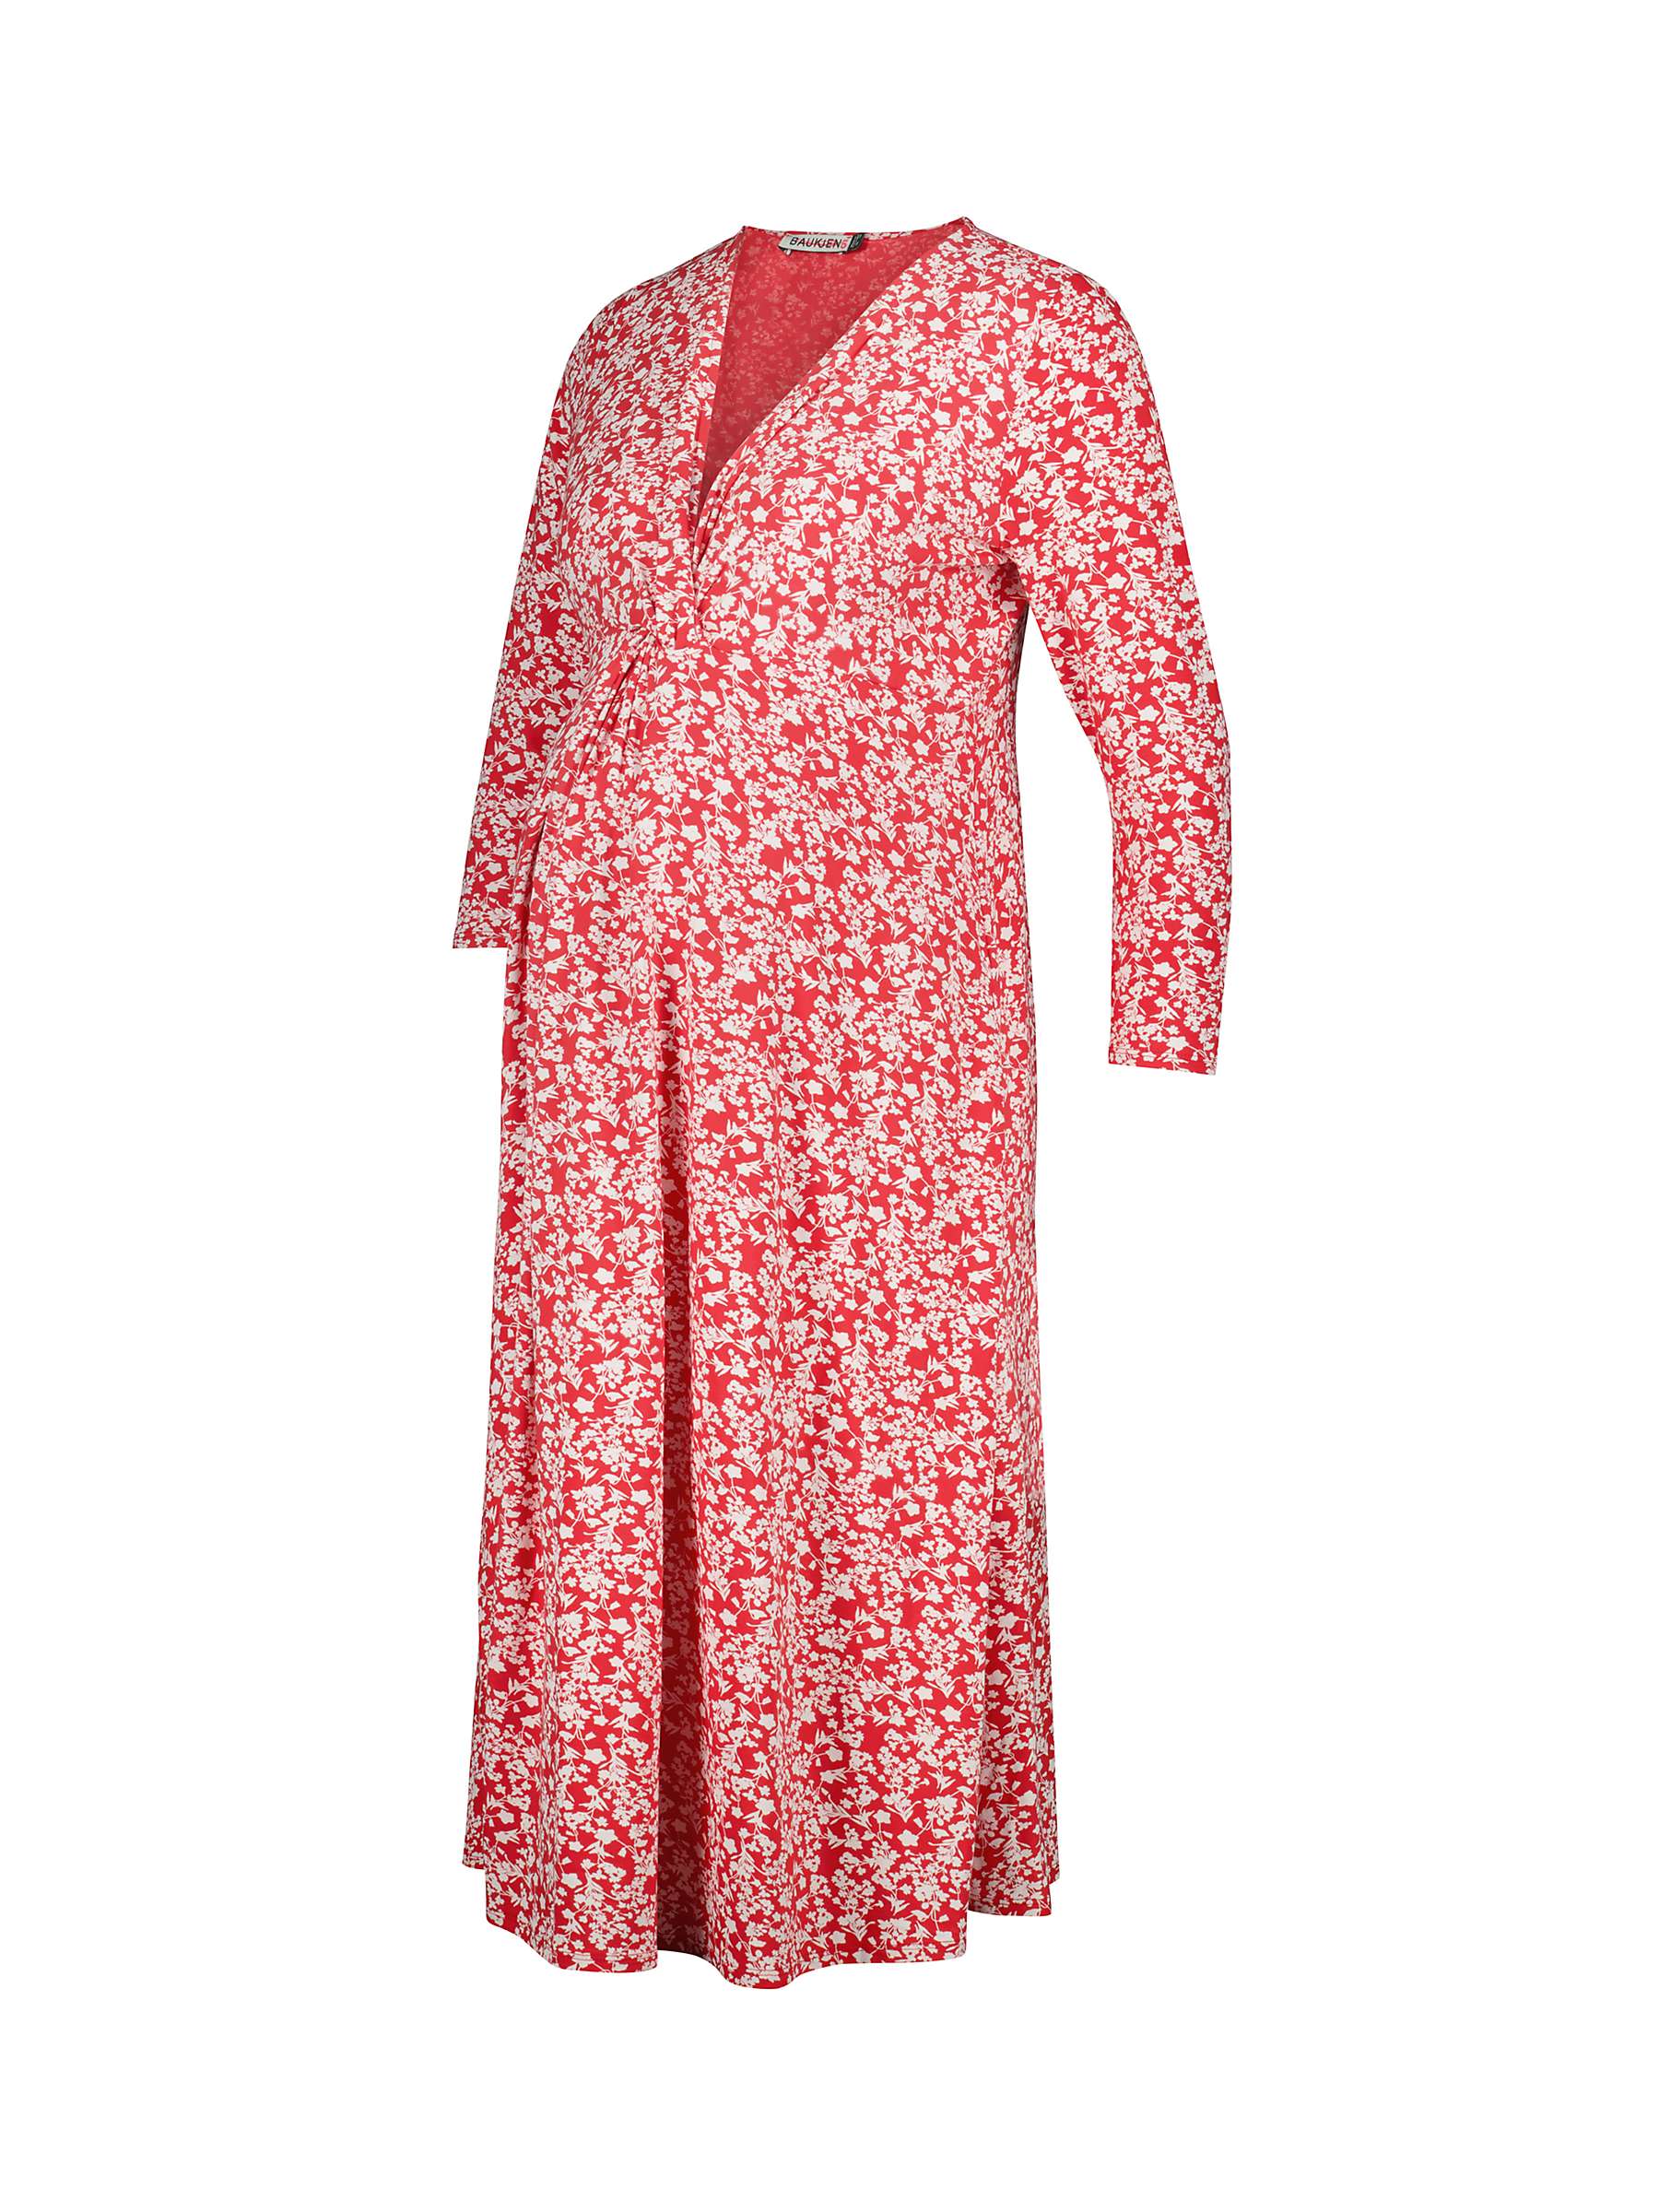 Buy Isabella Oliver Mia Maternity Dress, Red/White Online at johnlewis.com